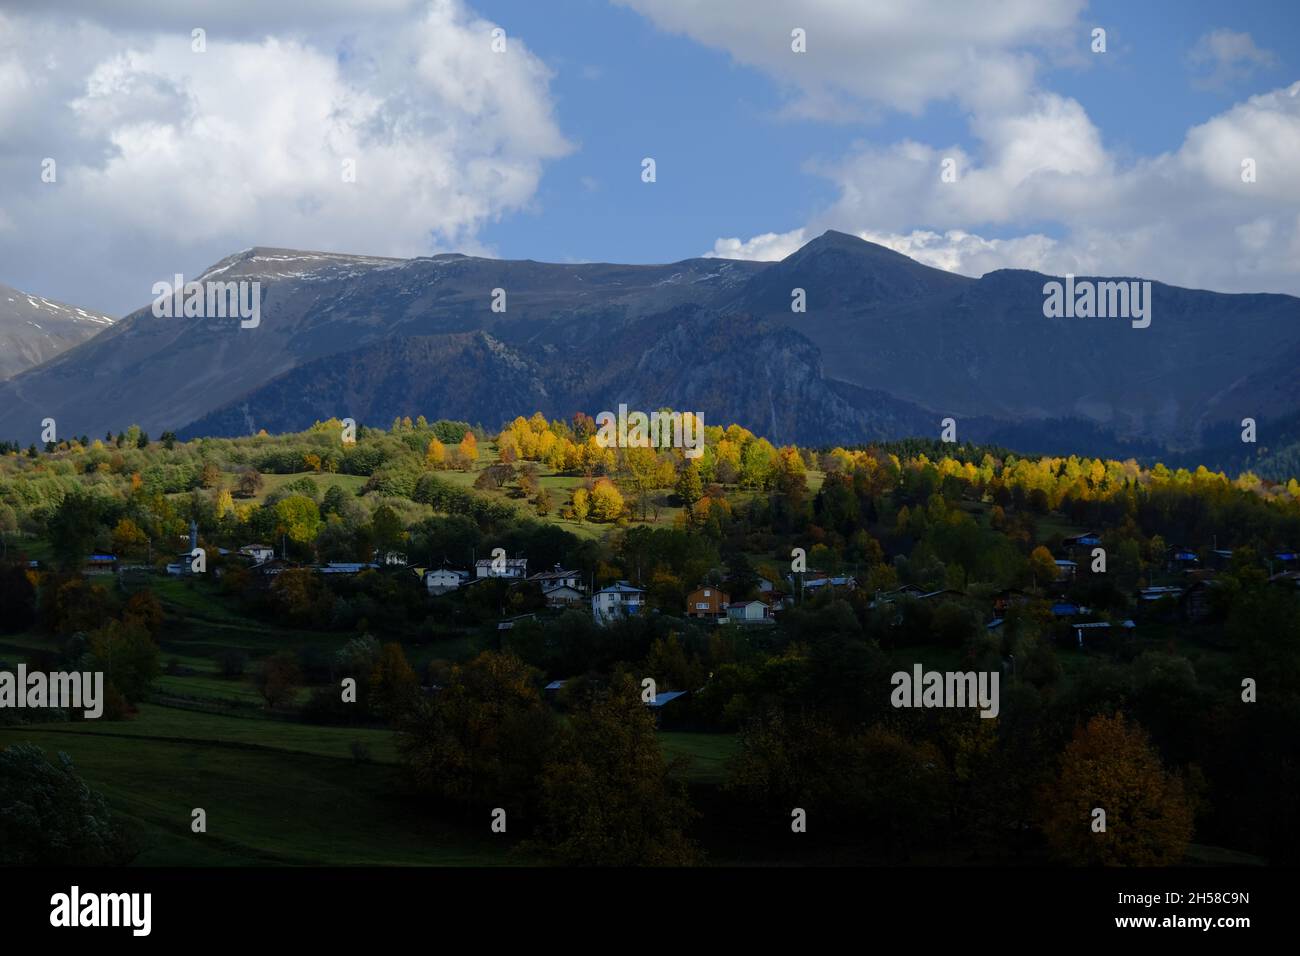 The natural beauties of Artvin province offer wonderful views to its visitors in autumn. Stock Photo